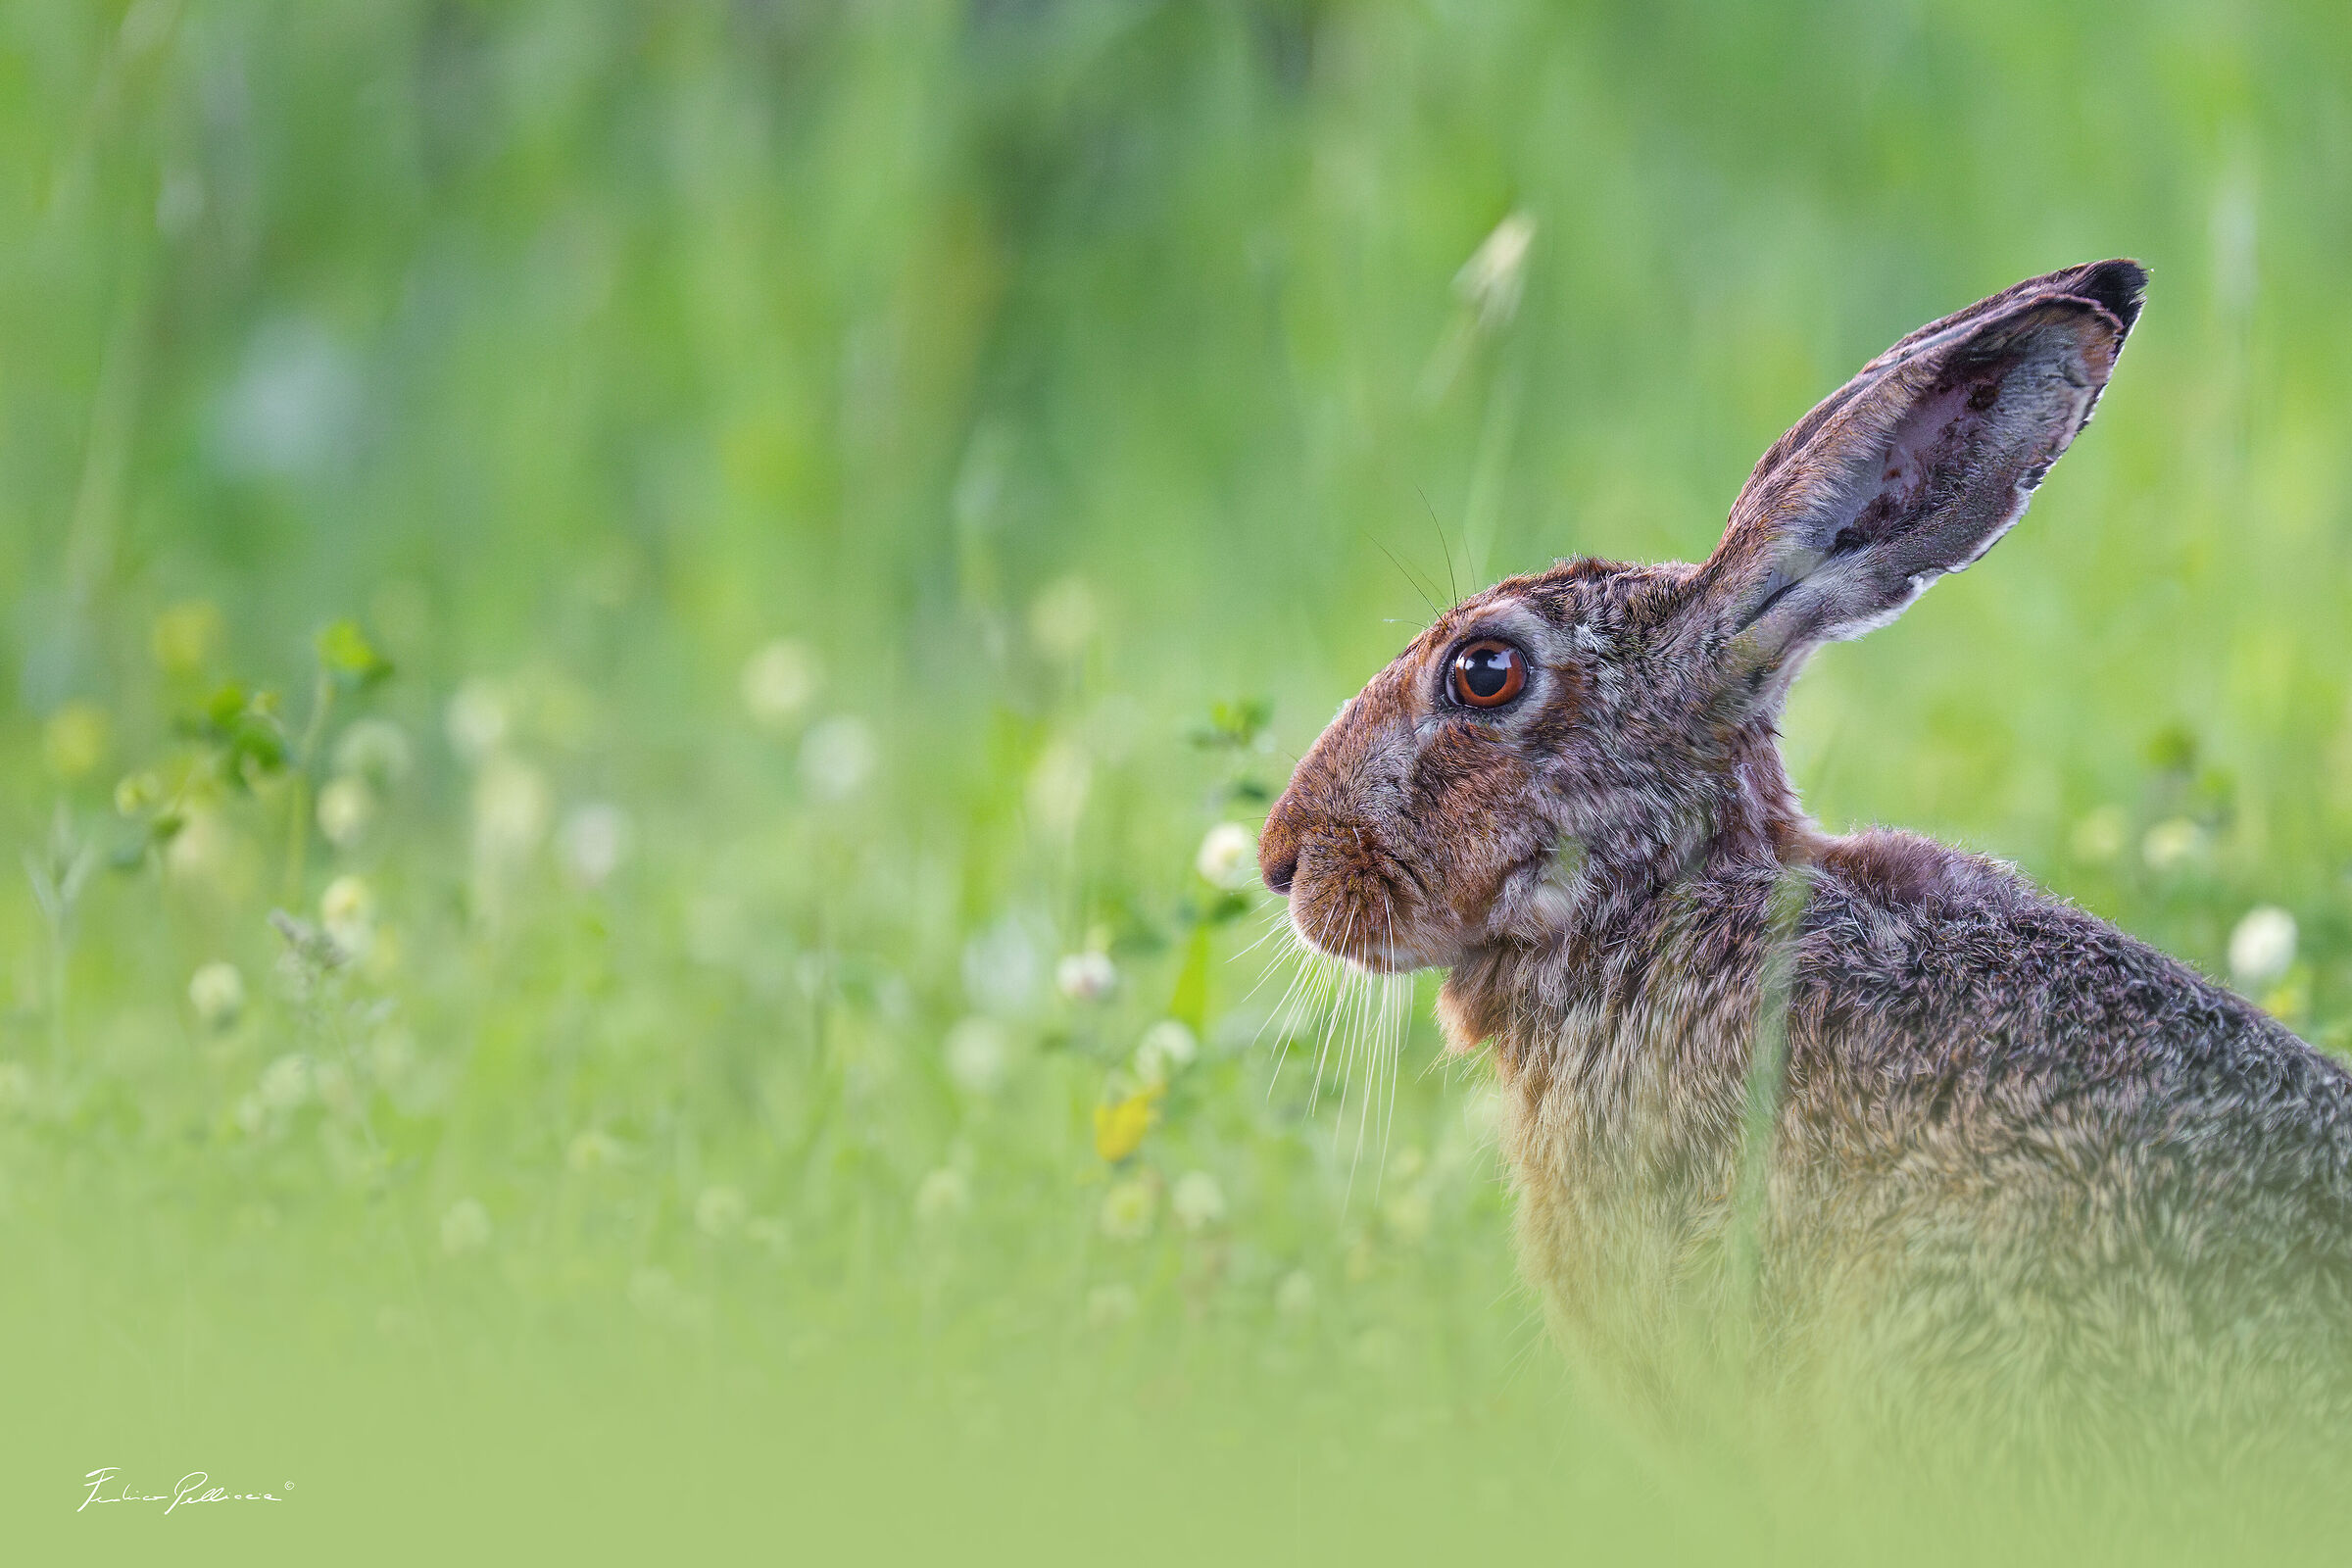 the profile of the Hare ...